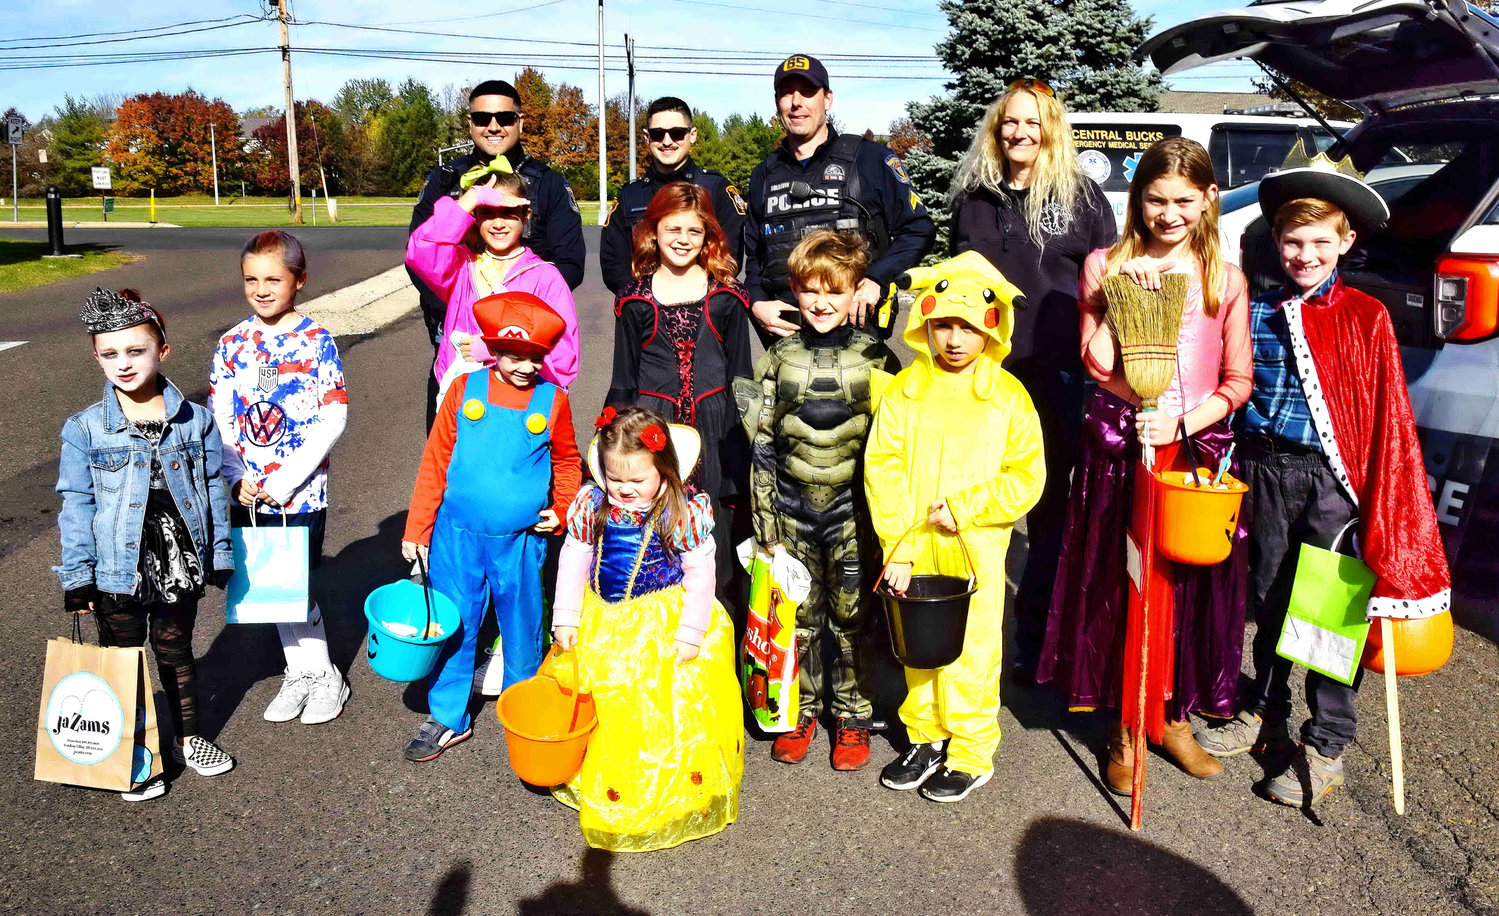 Police officers gather with children dressed in costumes.